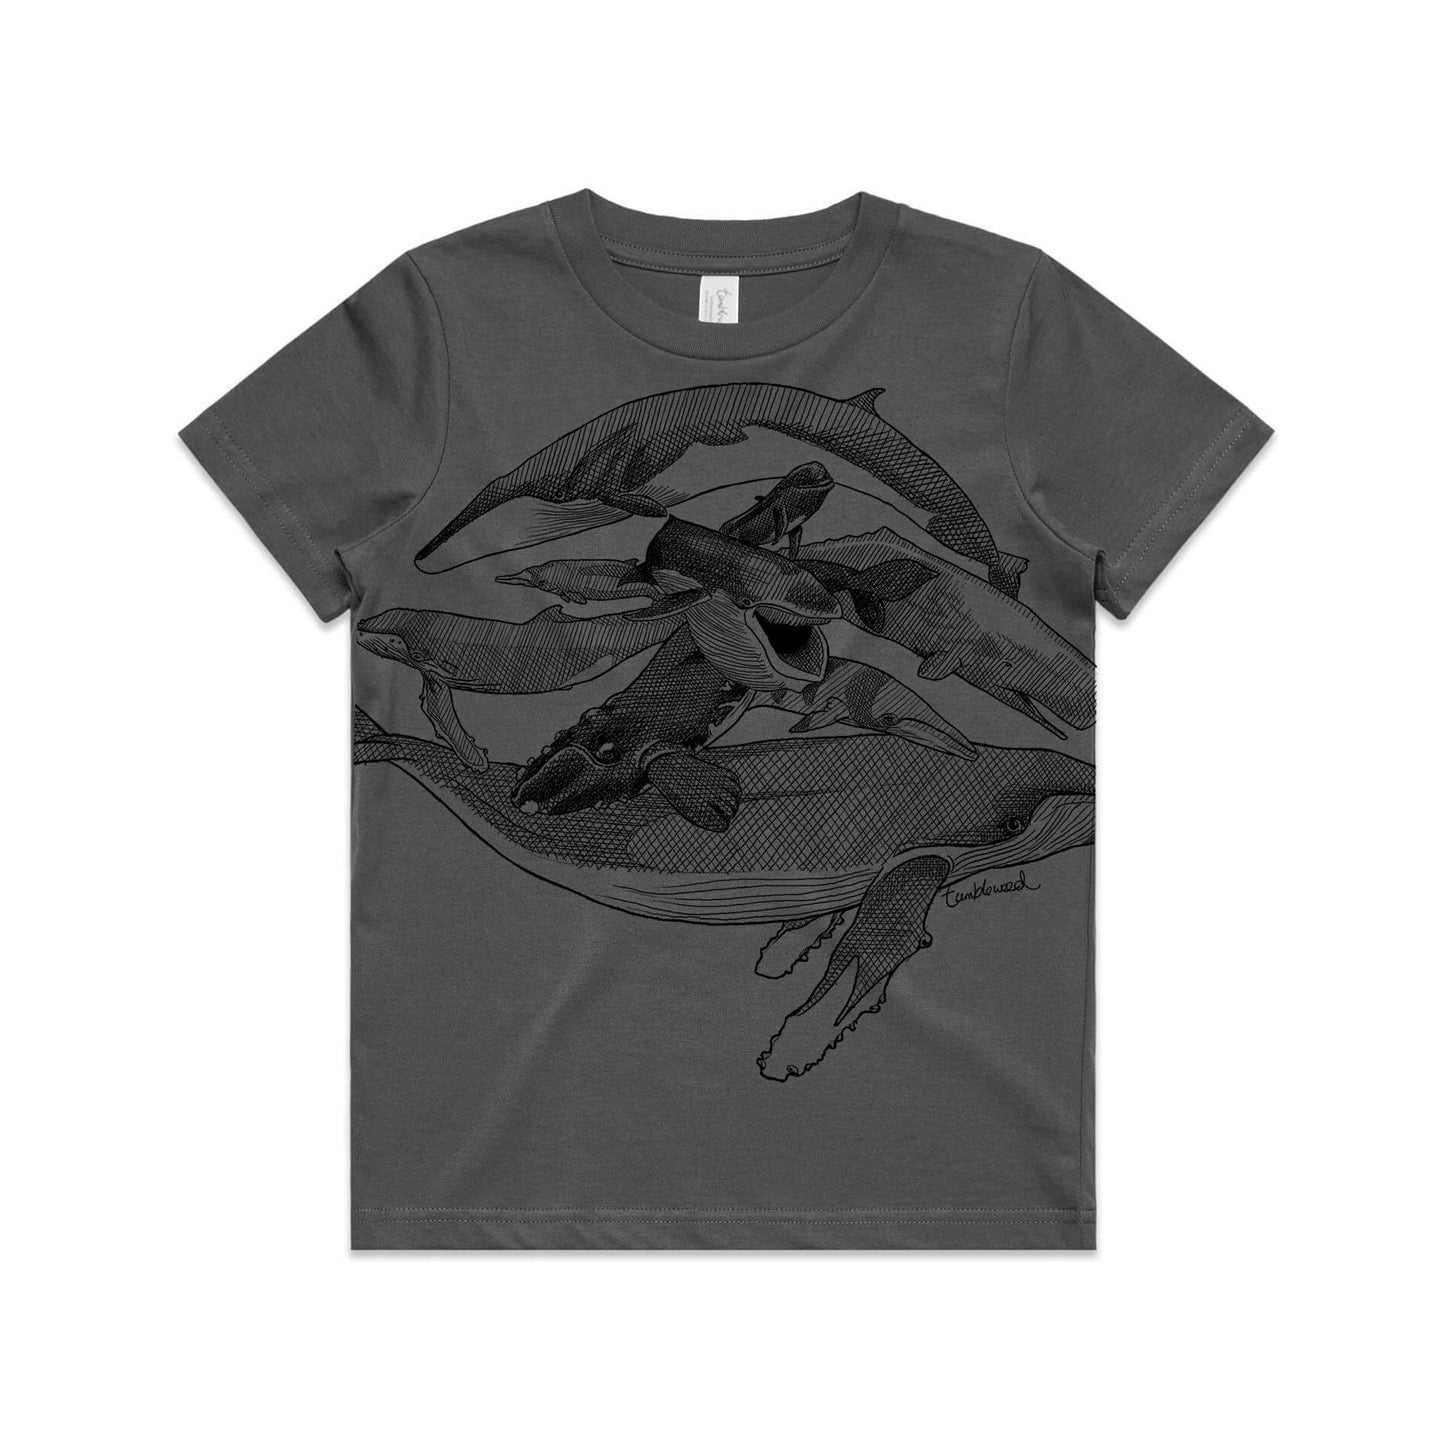 Charcoal, cotton kids' t-shirt with screen printed Kids whales design.